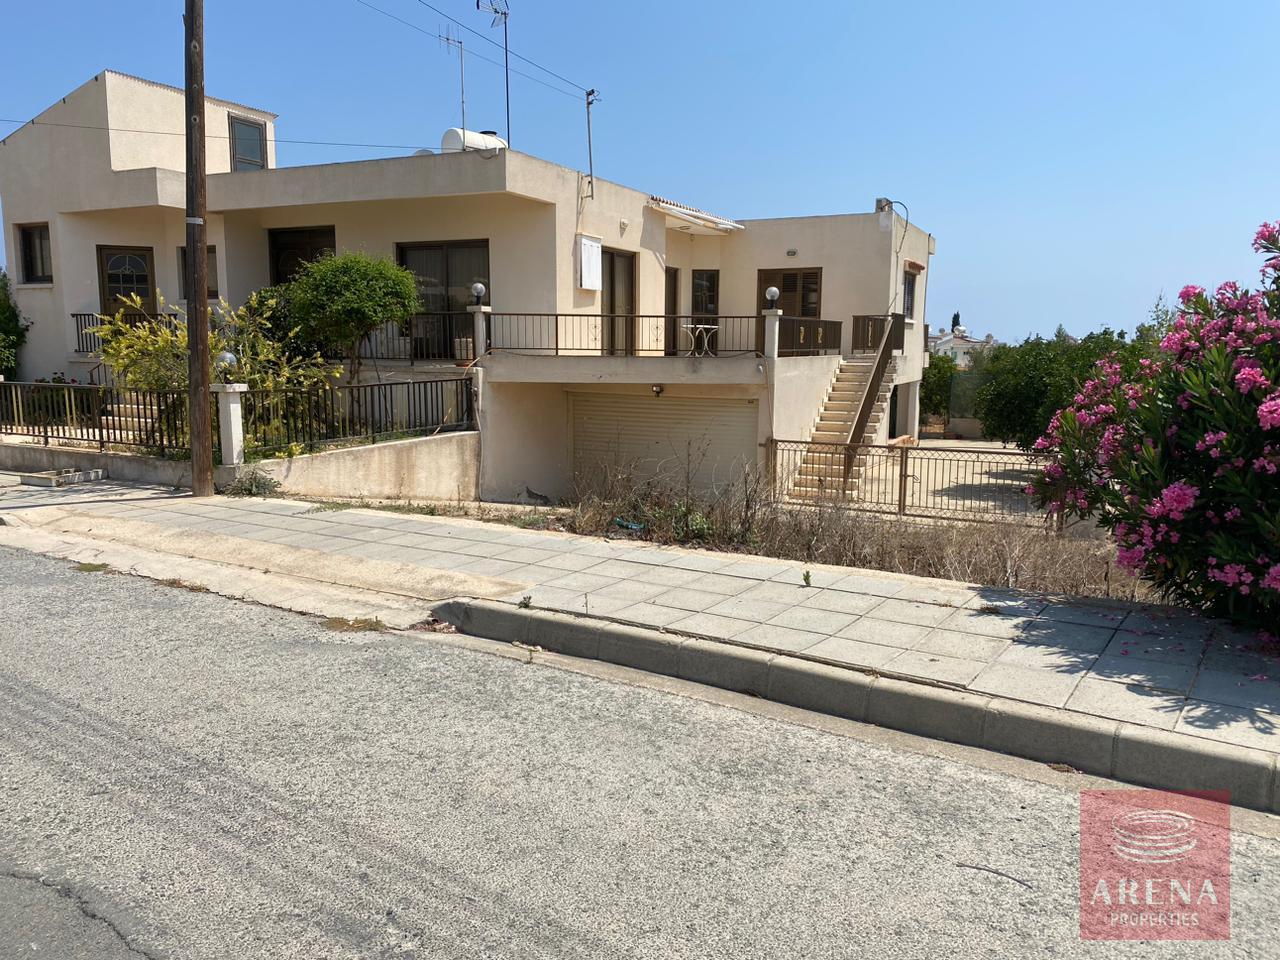 3 bed house in derynia to buy